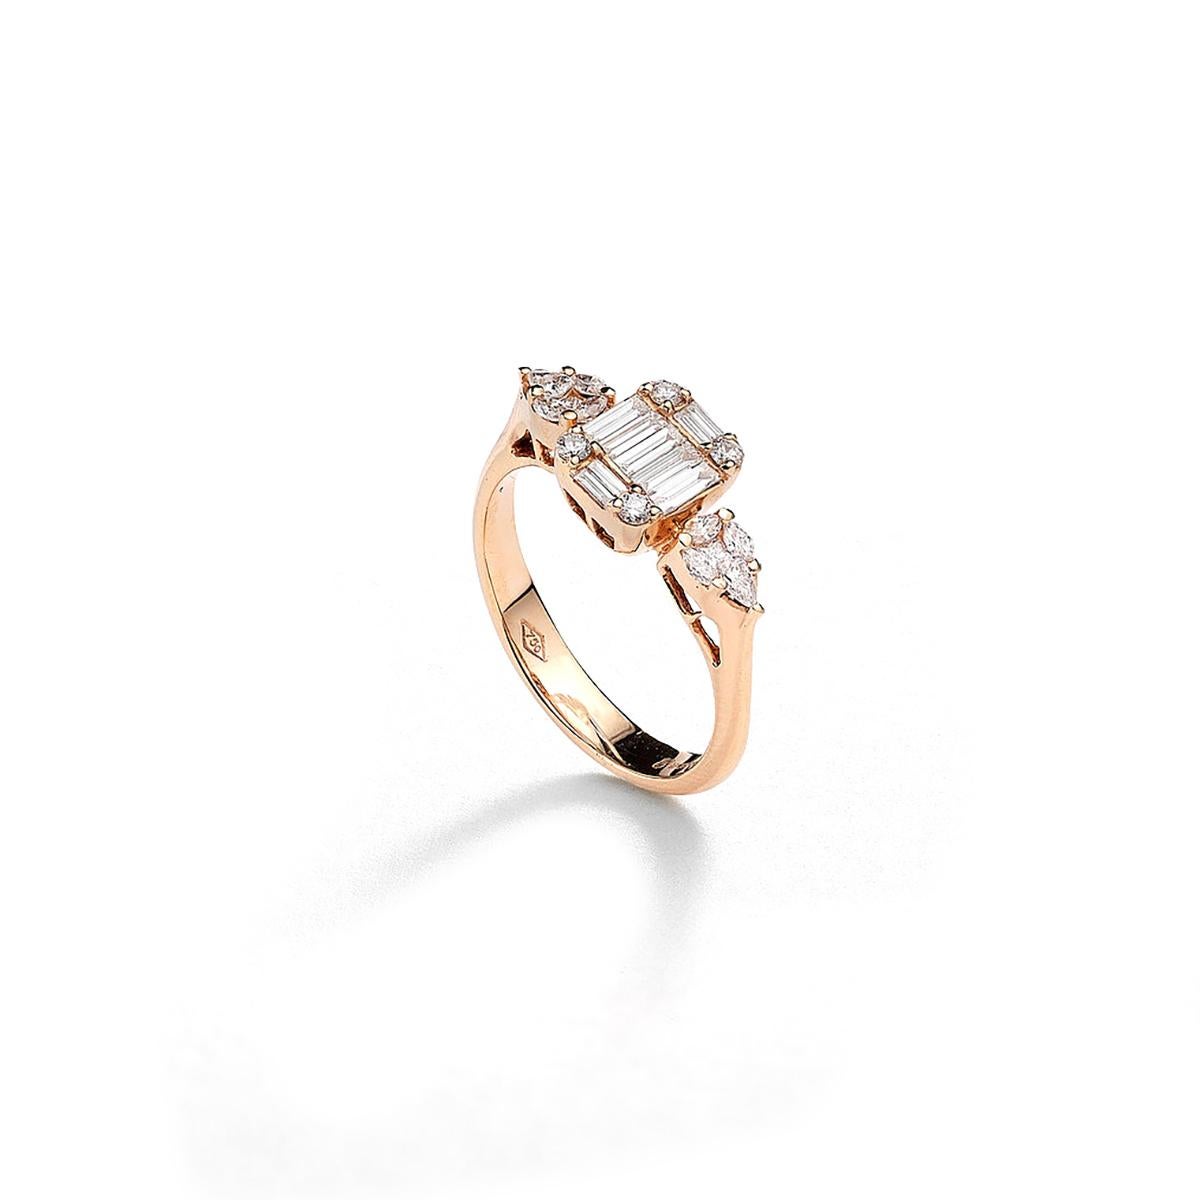 Ring in 18kt pink gold set with 20 princess, marquise, pear shaped and baguette cut diamonds 0.48 cts and 4 diamonds 0.08 cts Size 53

Total weight: 4.15 grams